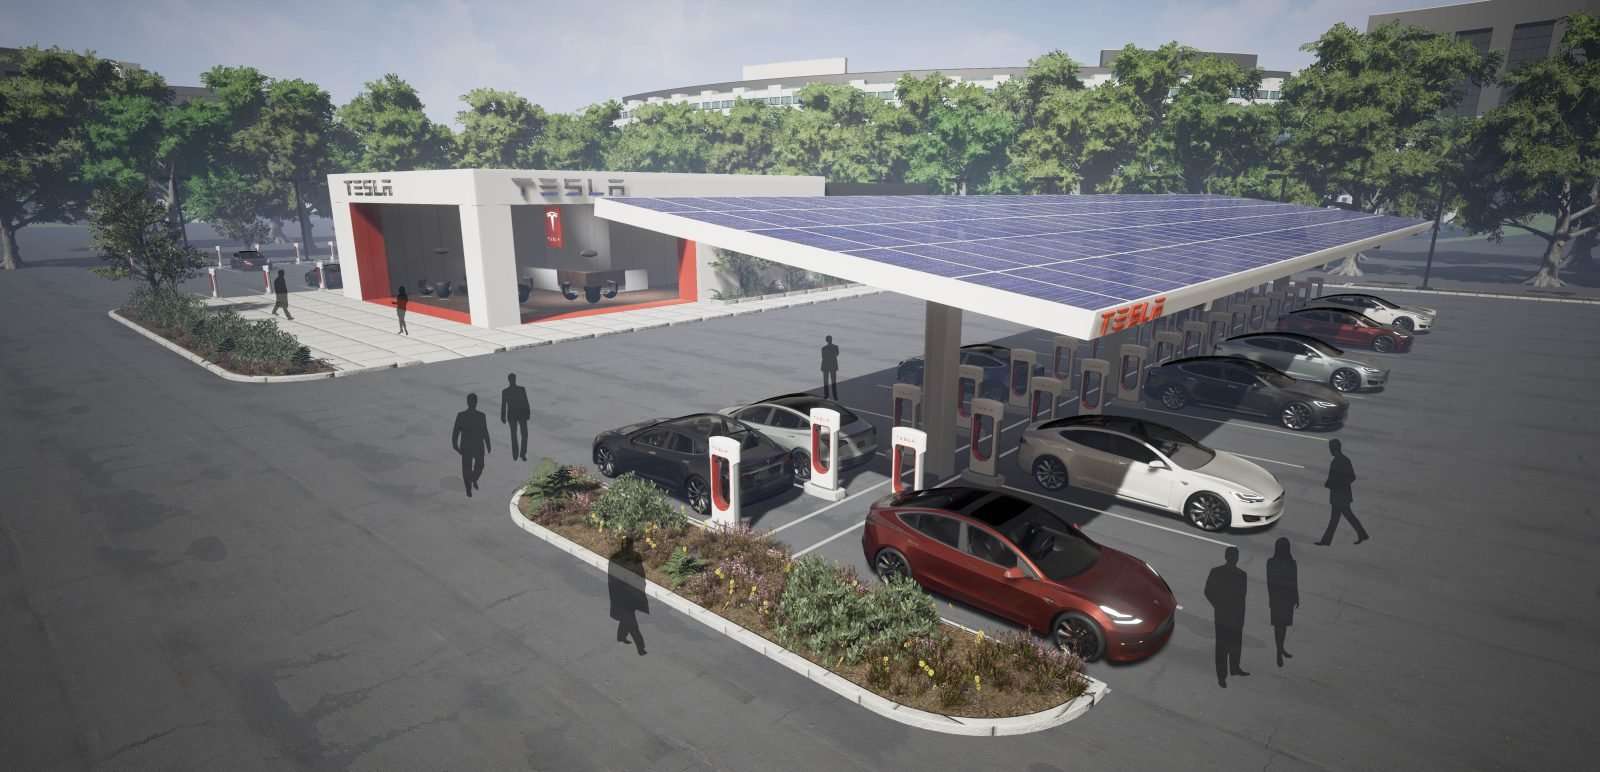 image for Tesla plans to disconnect ‘almost all’ Superchargers from the grid and go solar+battery, says Elon Musk